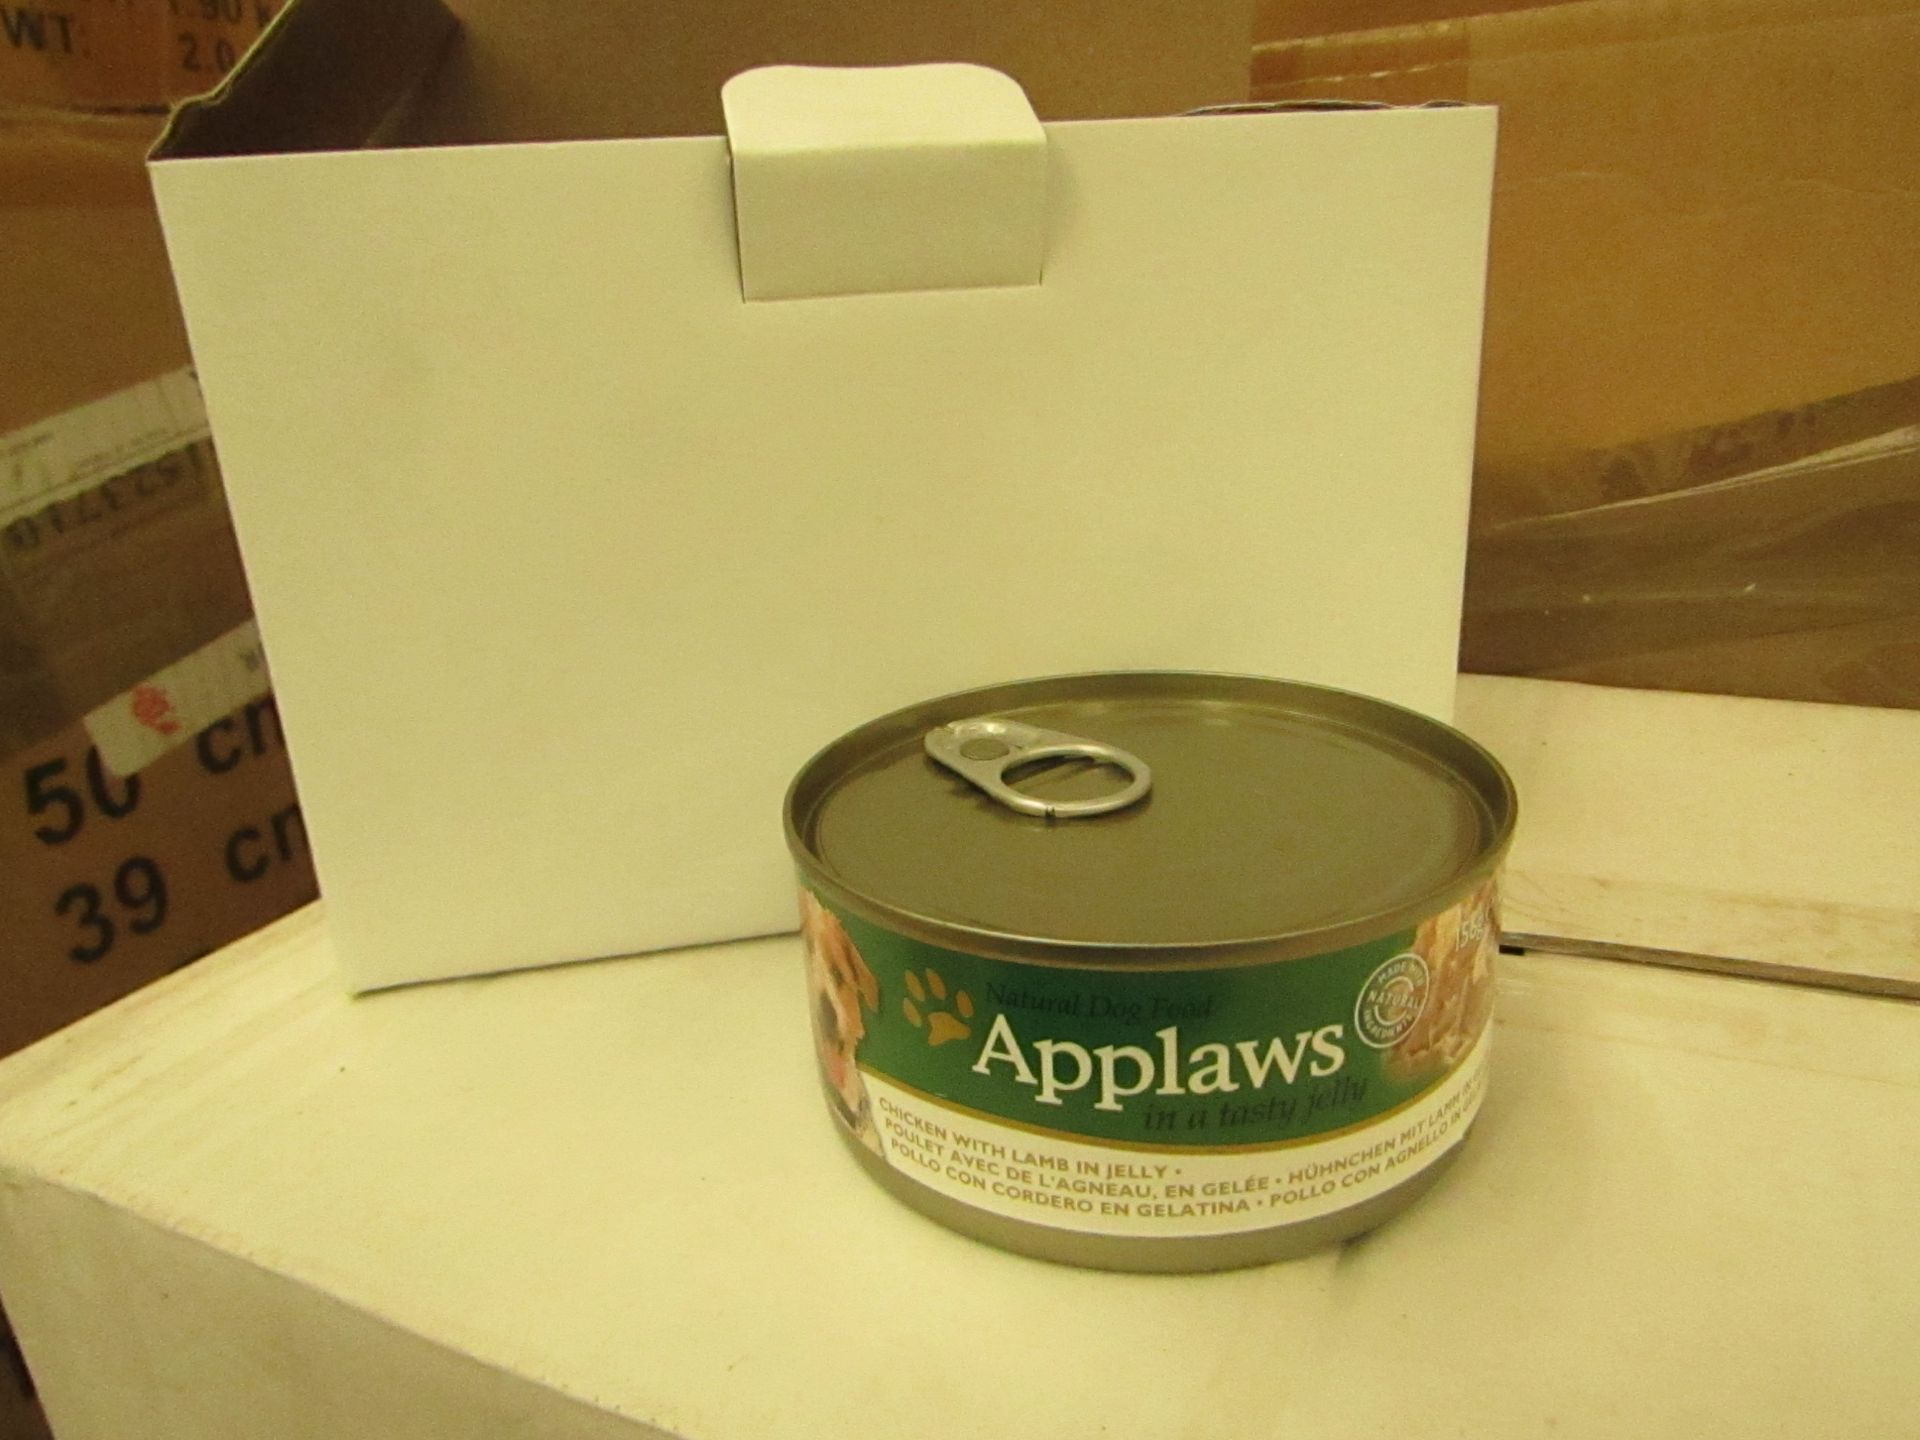 72x Applaws - Dog Tin Chicken, Lamb & Jelly - BB 24/08/20 - Unused & Boxed.